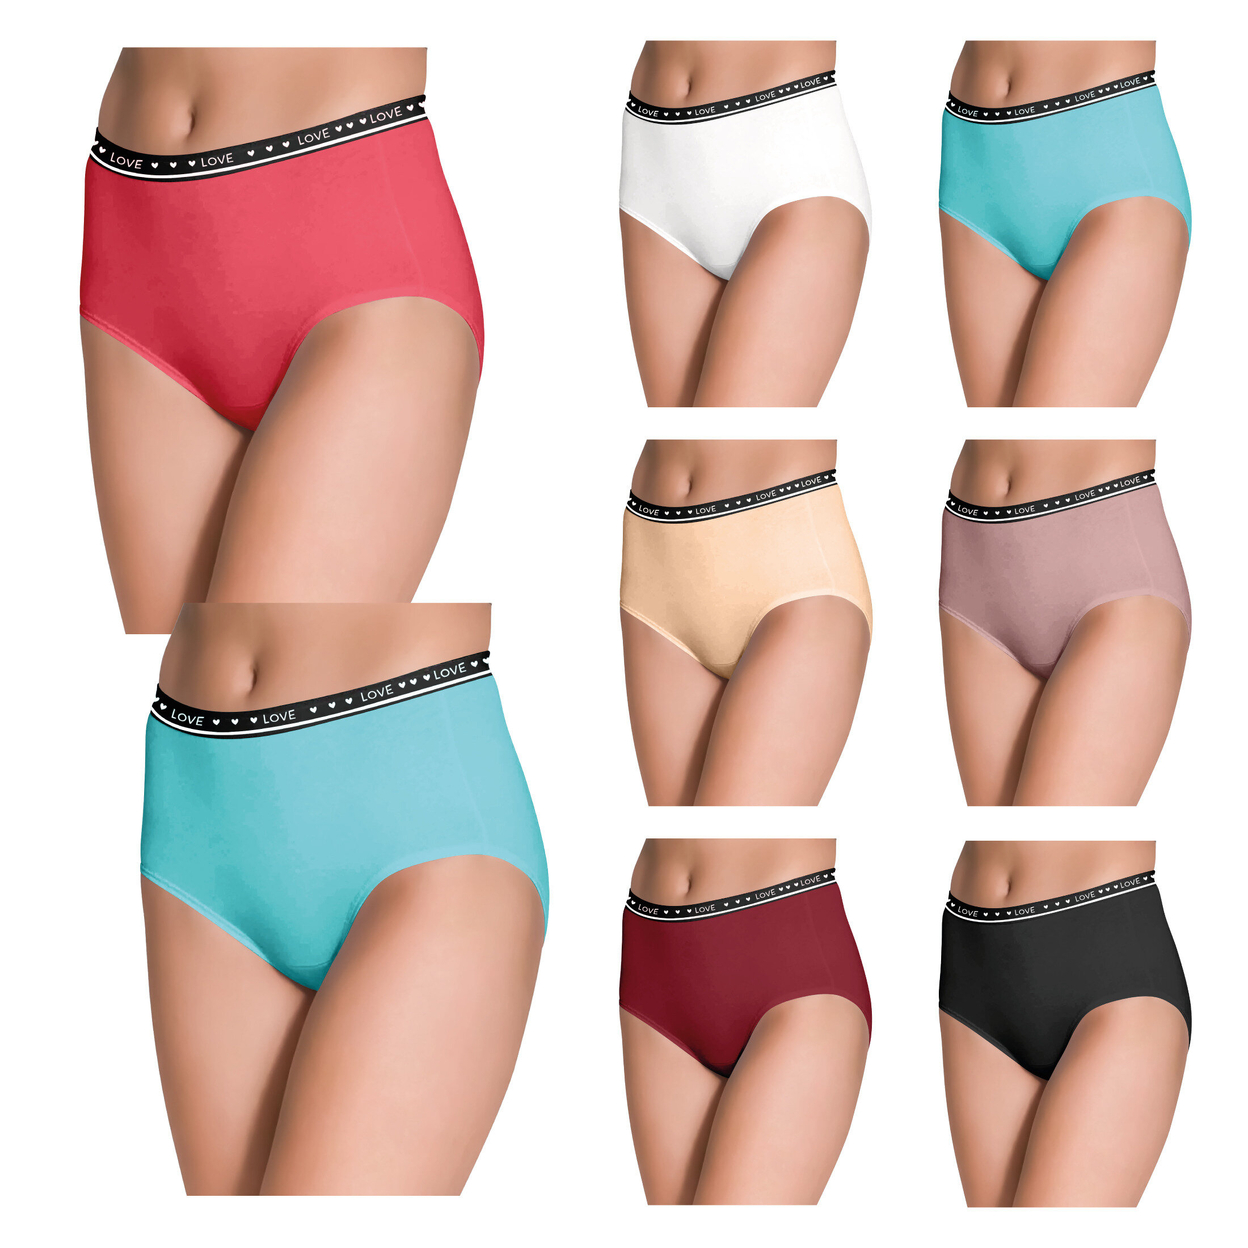 Multi-Pack: Women's Ultra Soft Moisture Wicking Panties Cotton Perfect Fit Underwear (Plus Sizes Available) - 12-Pack, Small